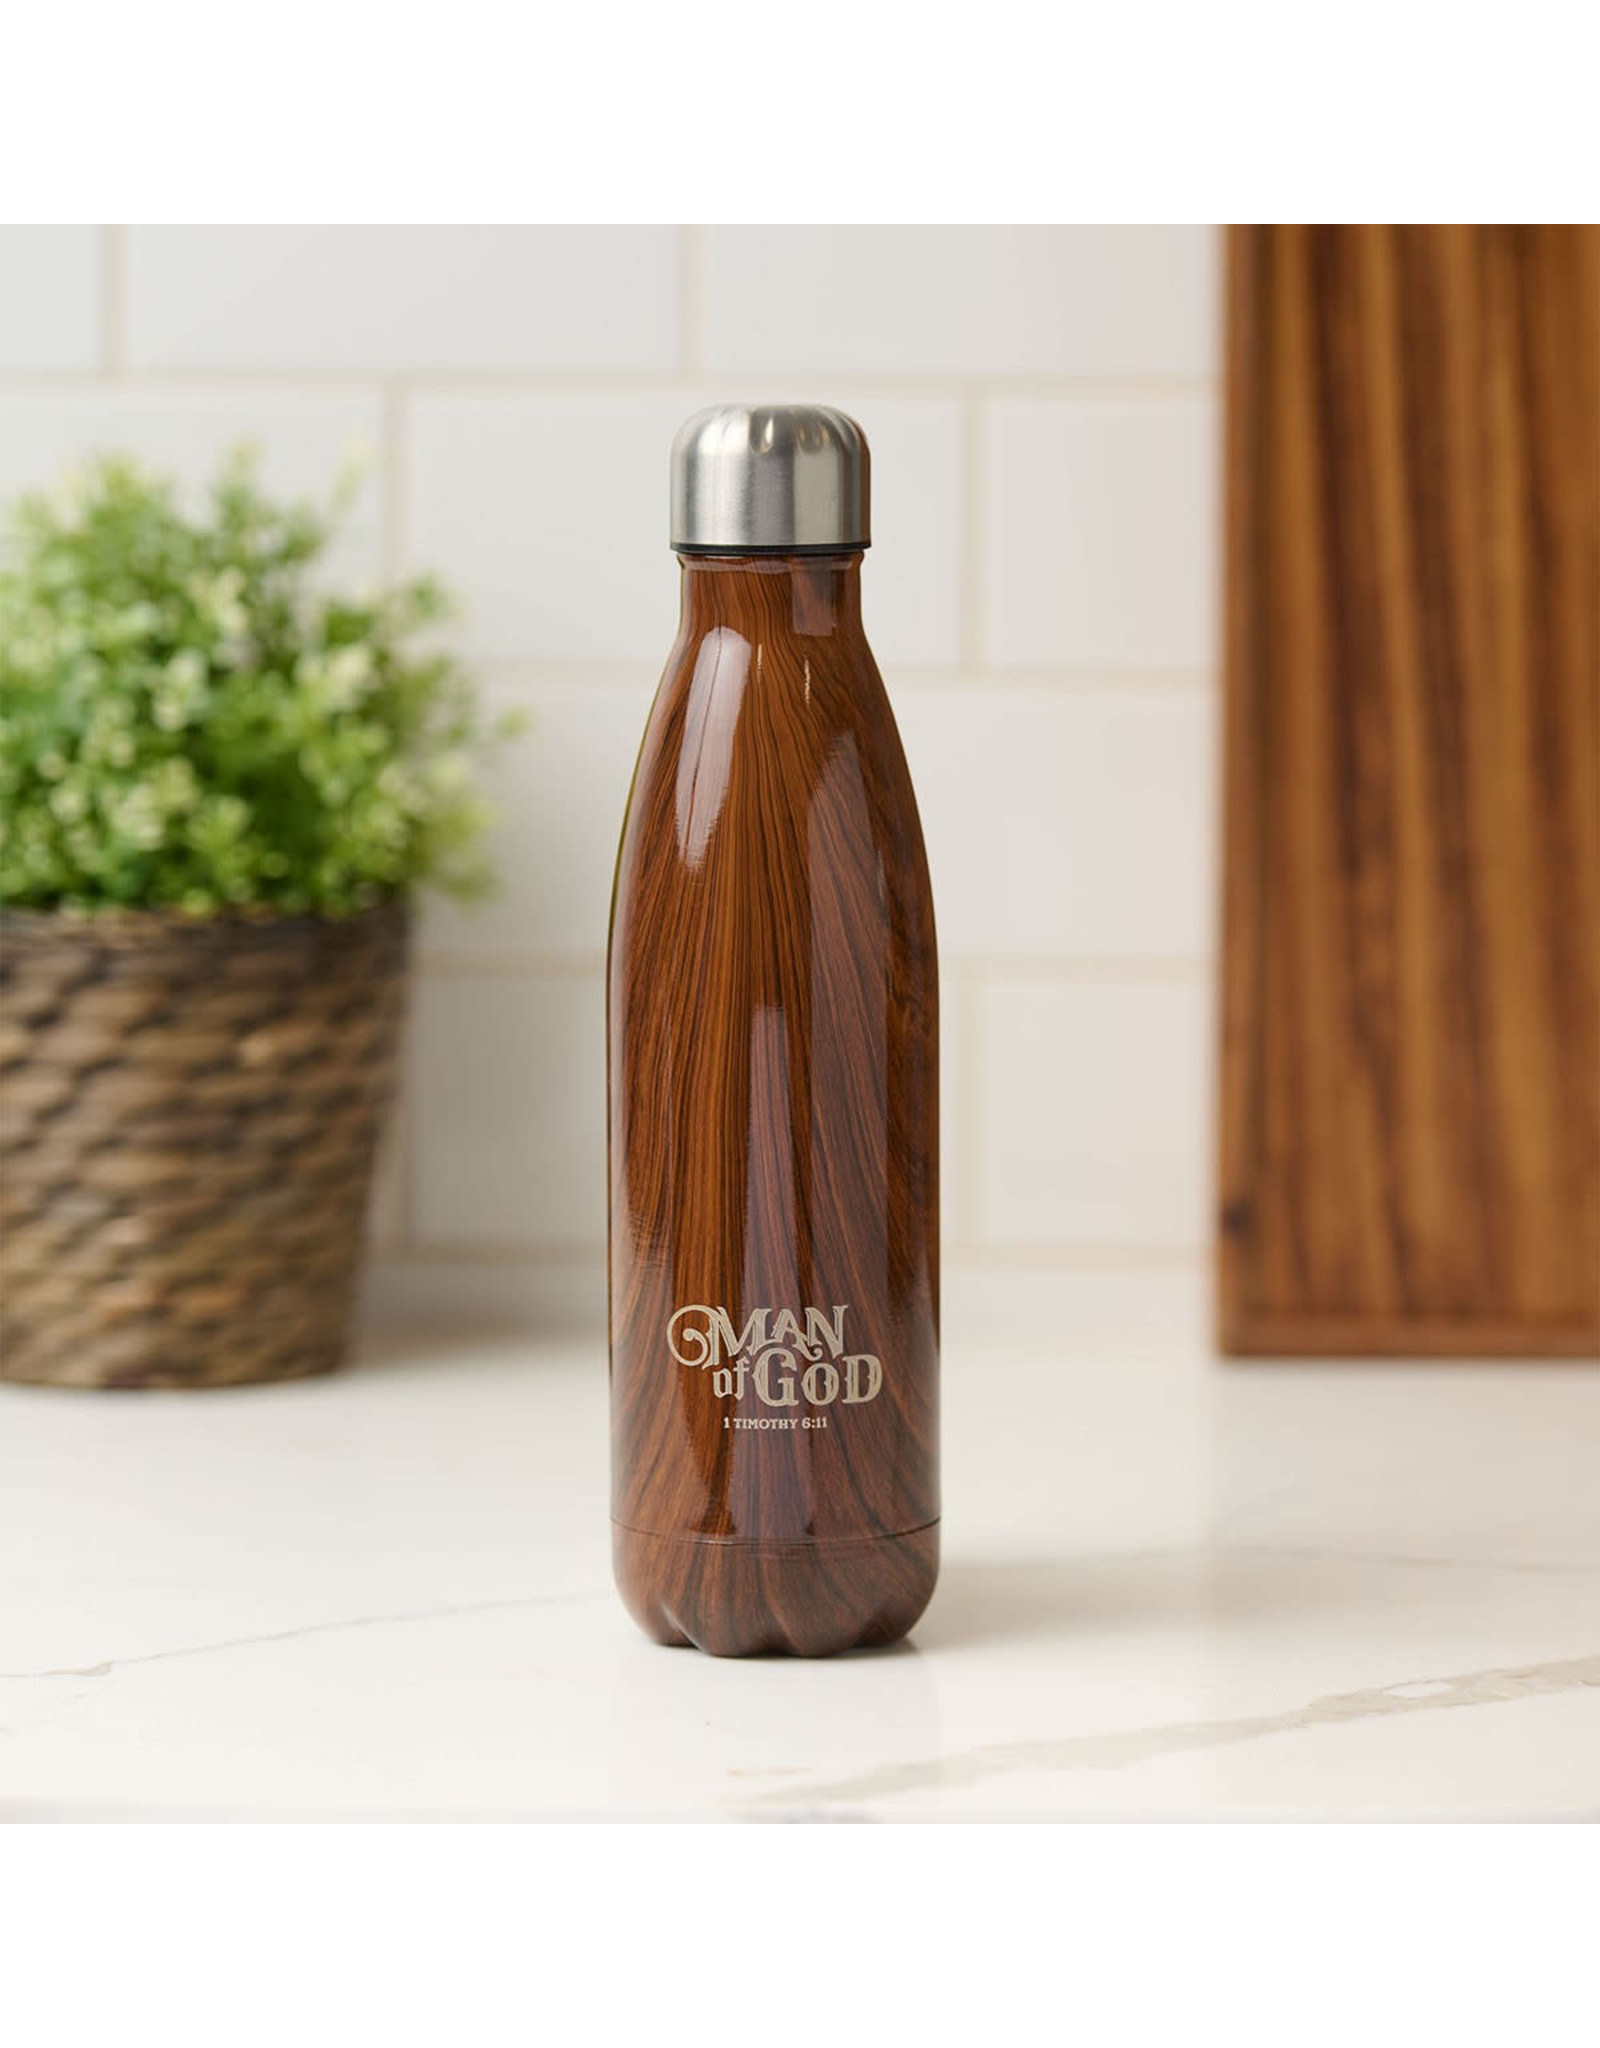 Man of God Wood Design Stainless Steel Water Bottle - 1 Timothy 6:11 -  Reilly's Church Supply & Gift Boutique